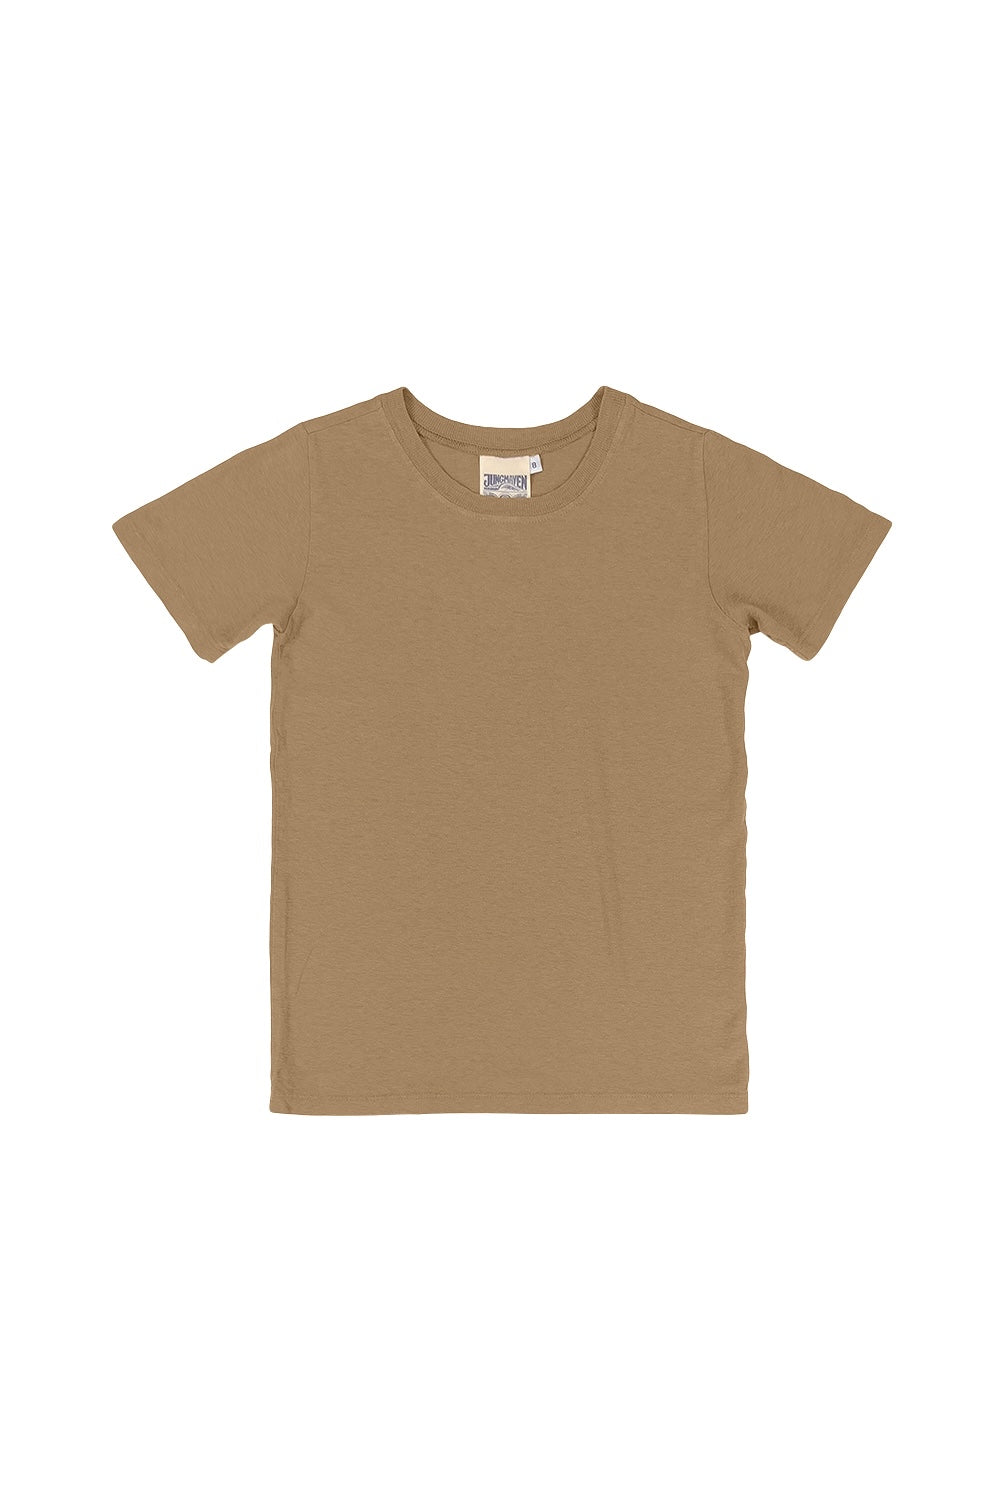 Grom Tee | Jungmaven Hemp Clothing & Accessories / Color: Coyote